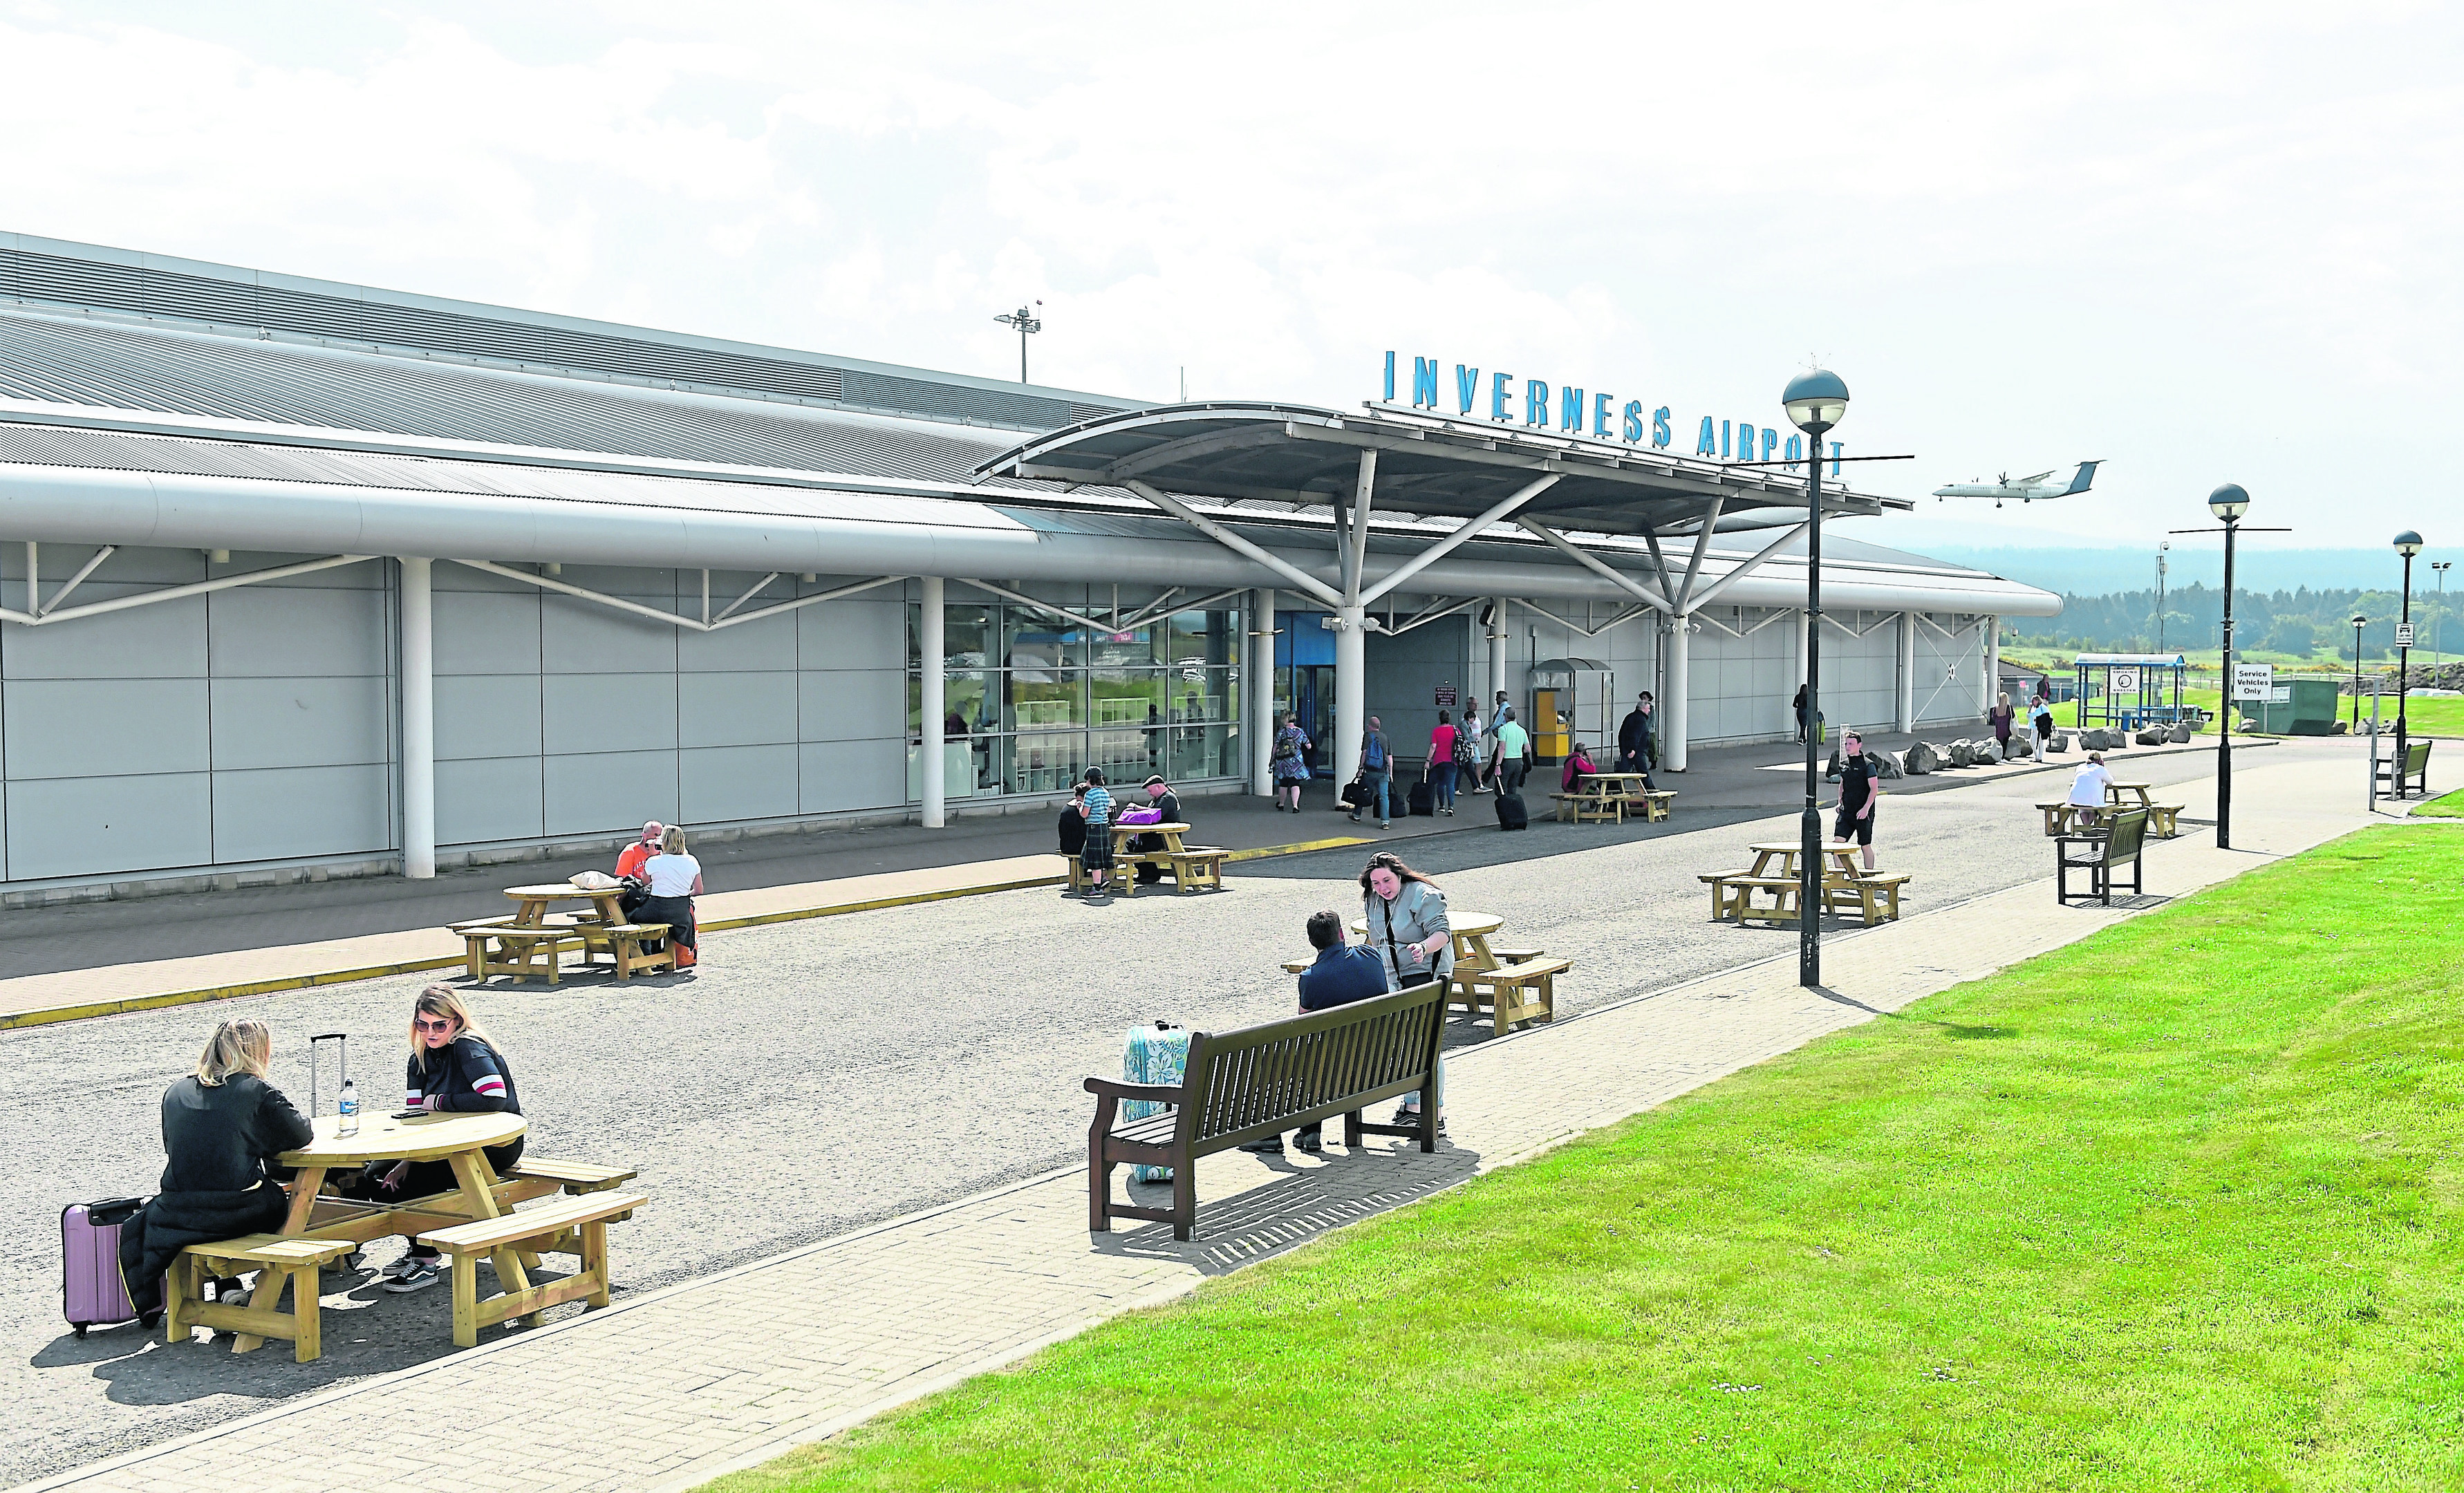 Inverness Airport